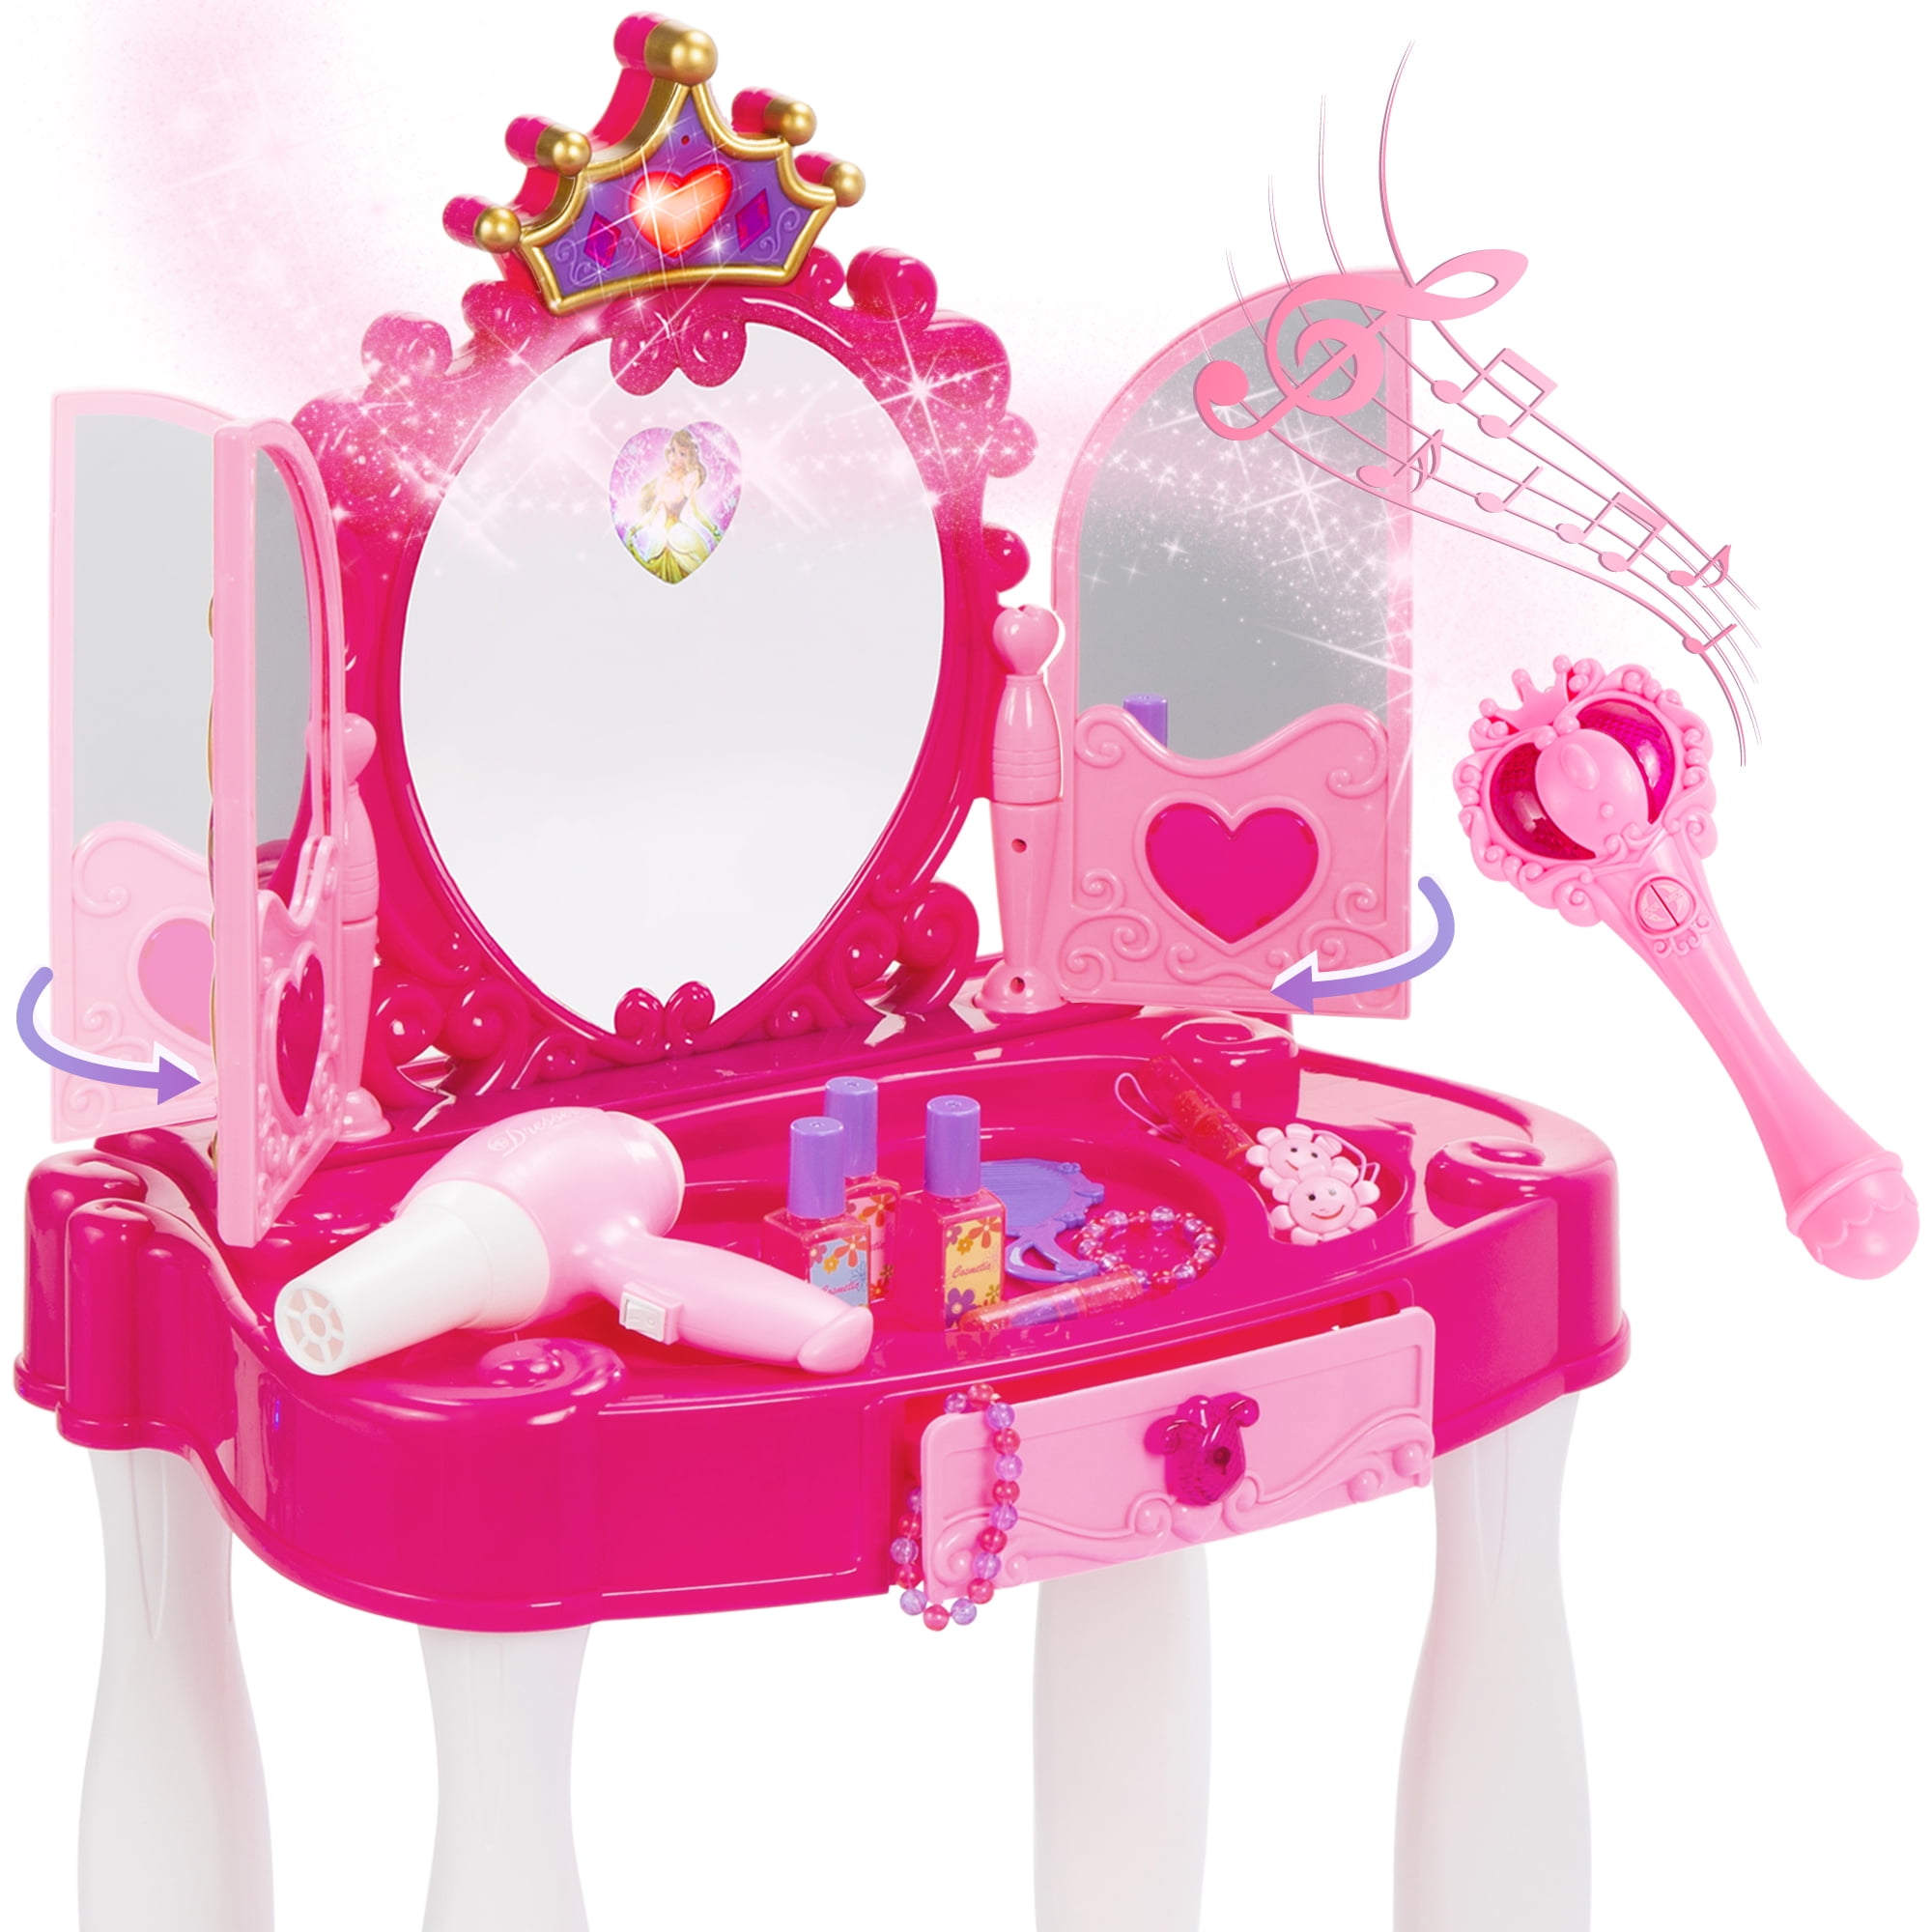 Girls Role Playset Dressing Table w/ Earrings Rings Lipstick Pretend Toys 